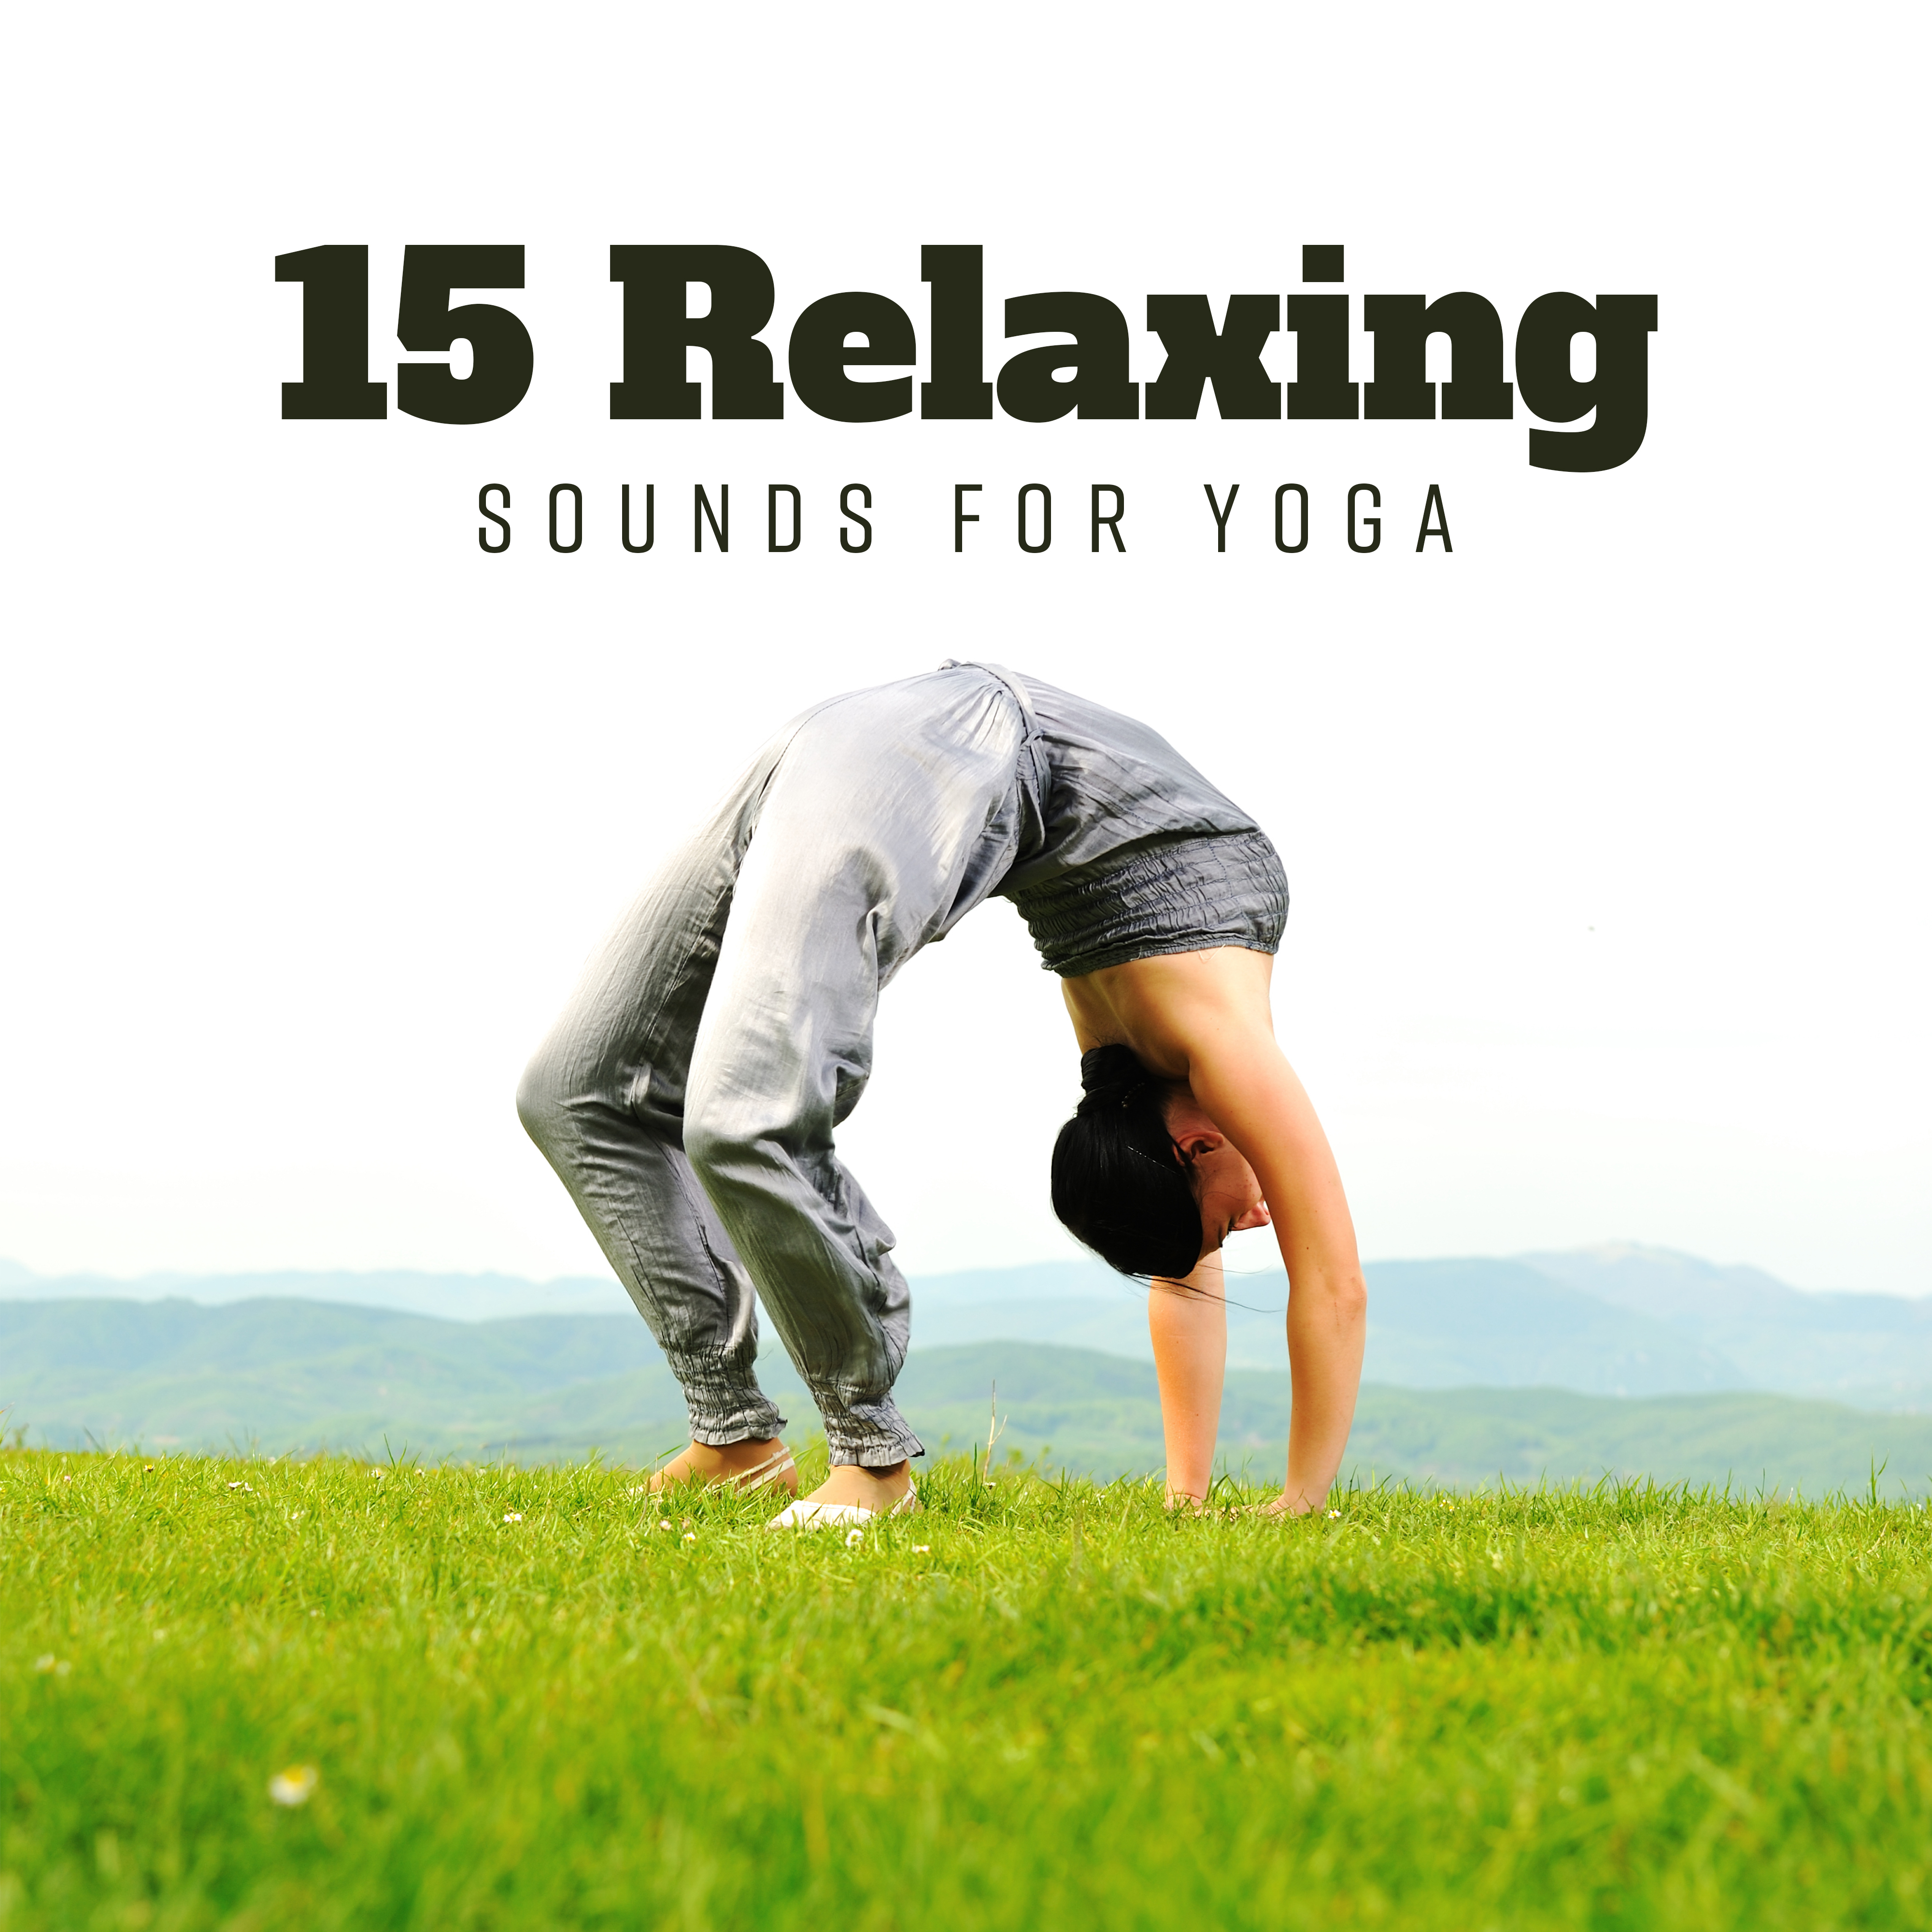 15 Relaxing Sounds for Yoga